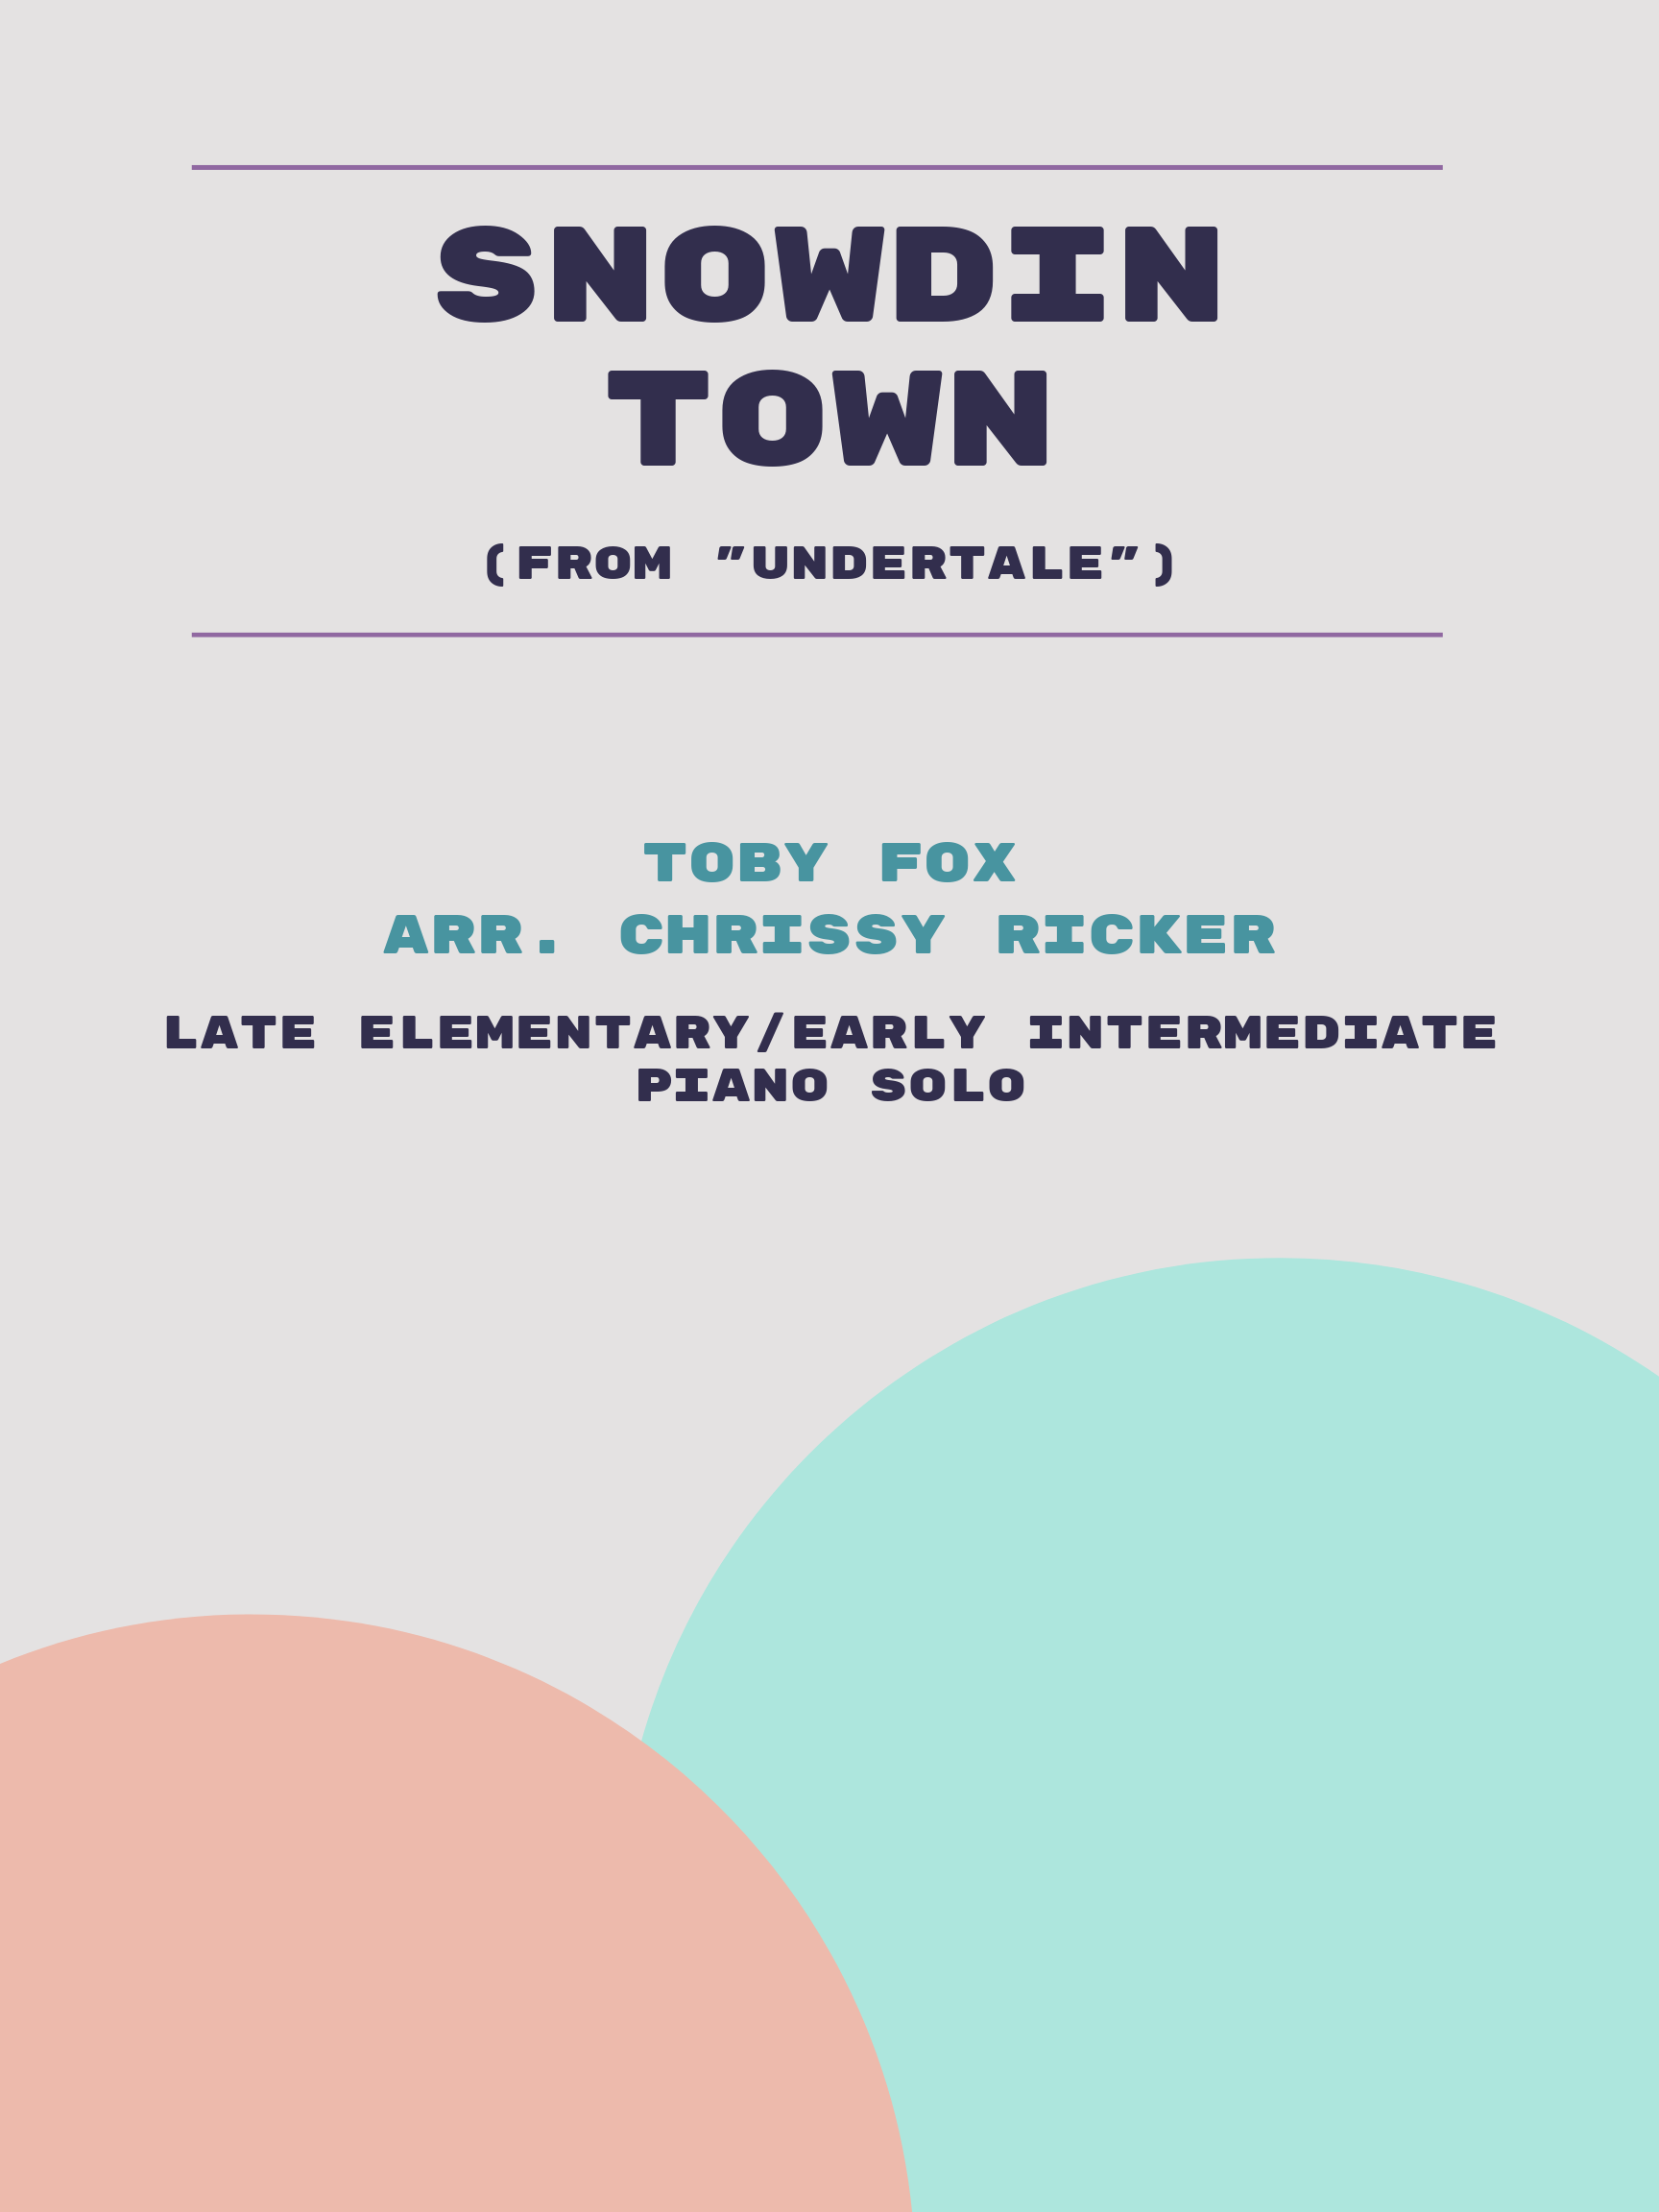 Snowdin Town by Toby Fox